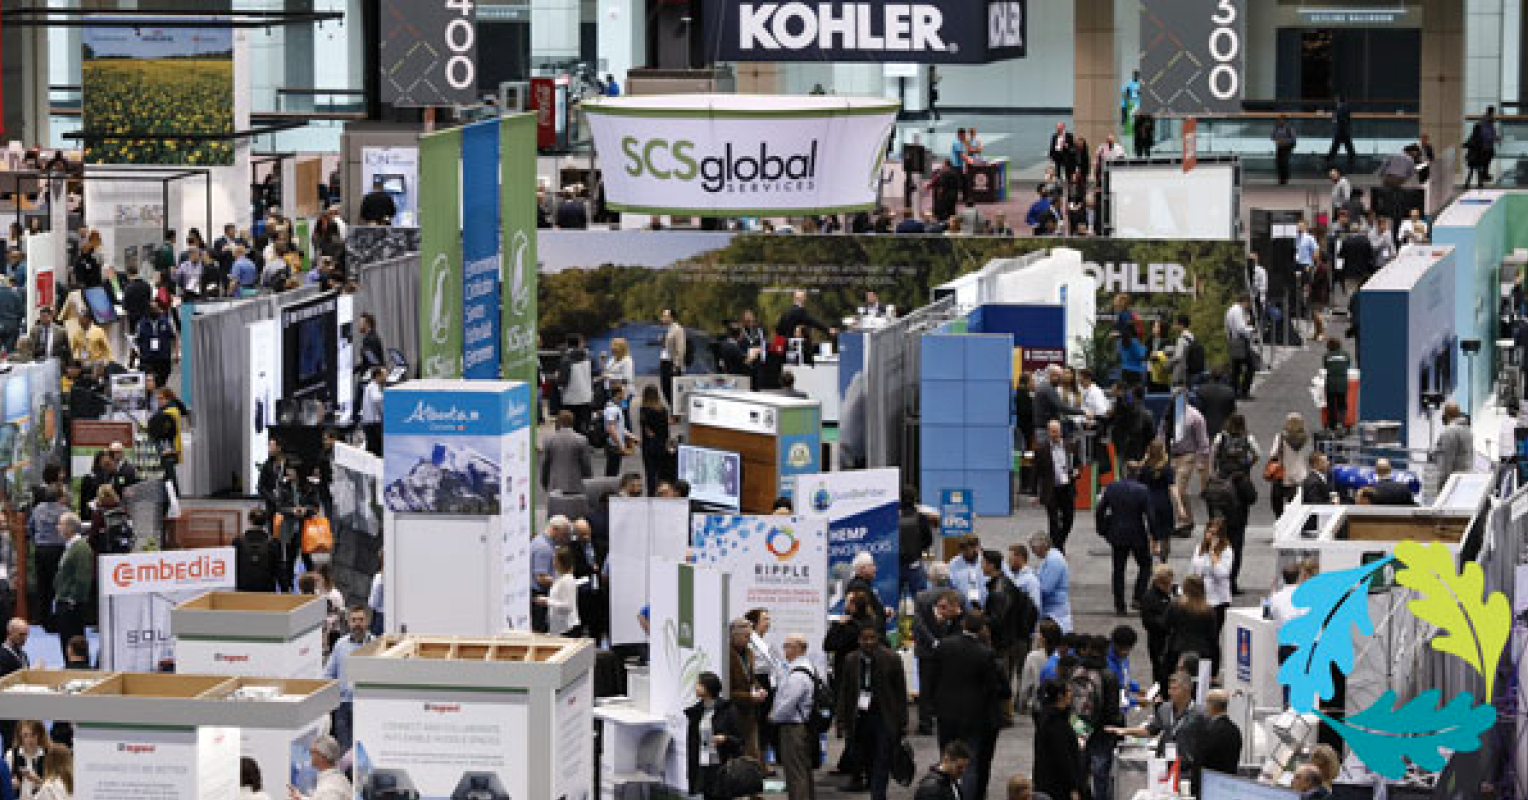 What You’ll Find at Greenbuild 2019